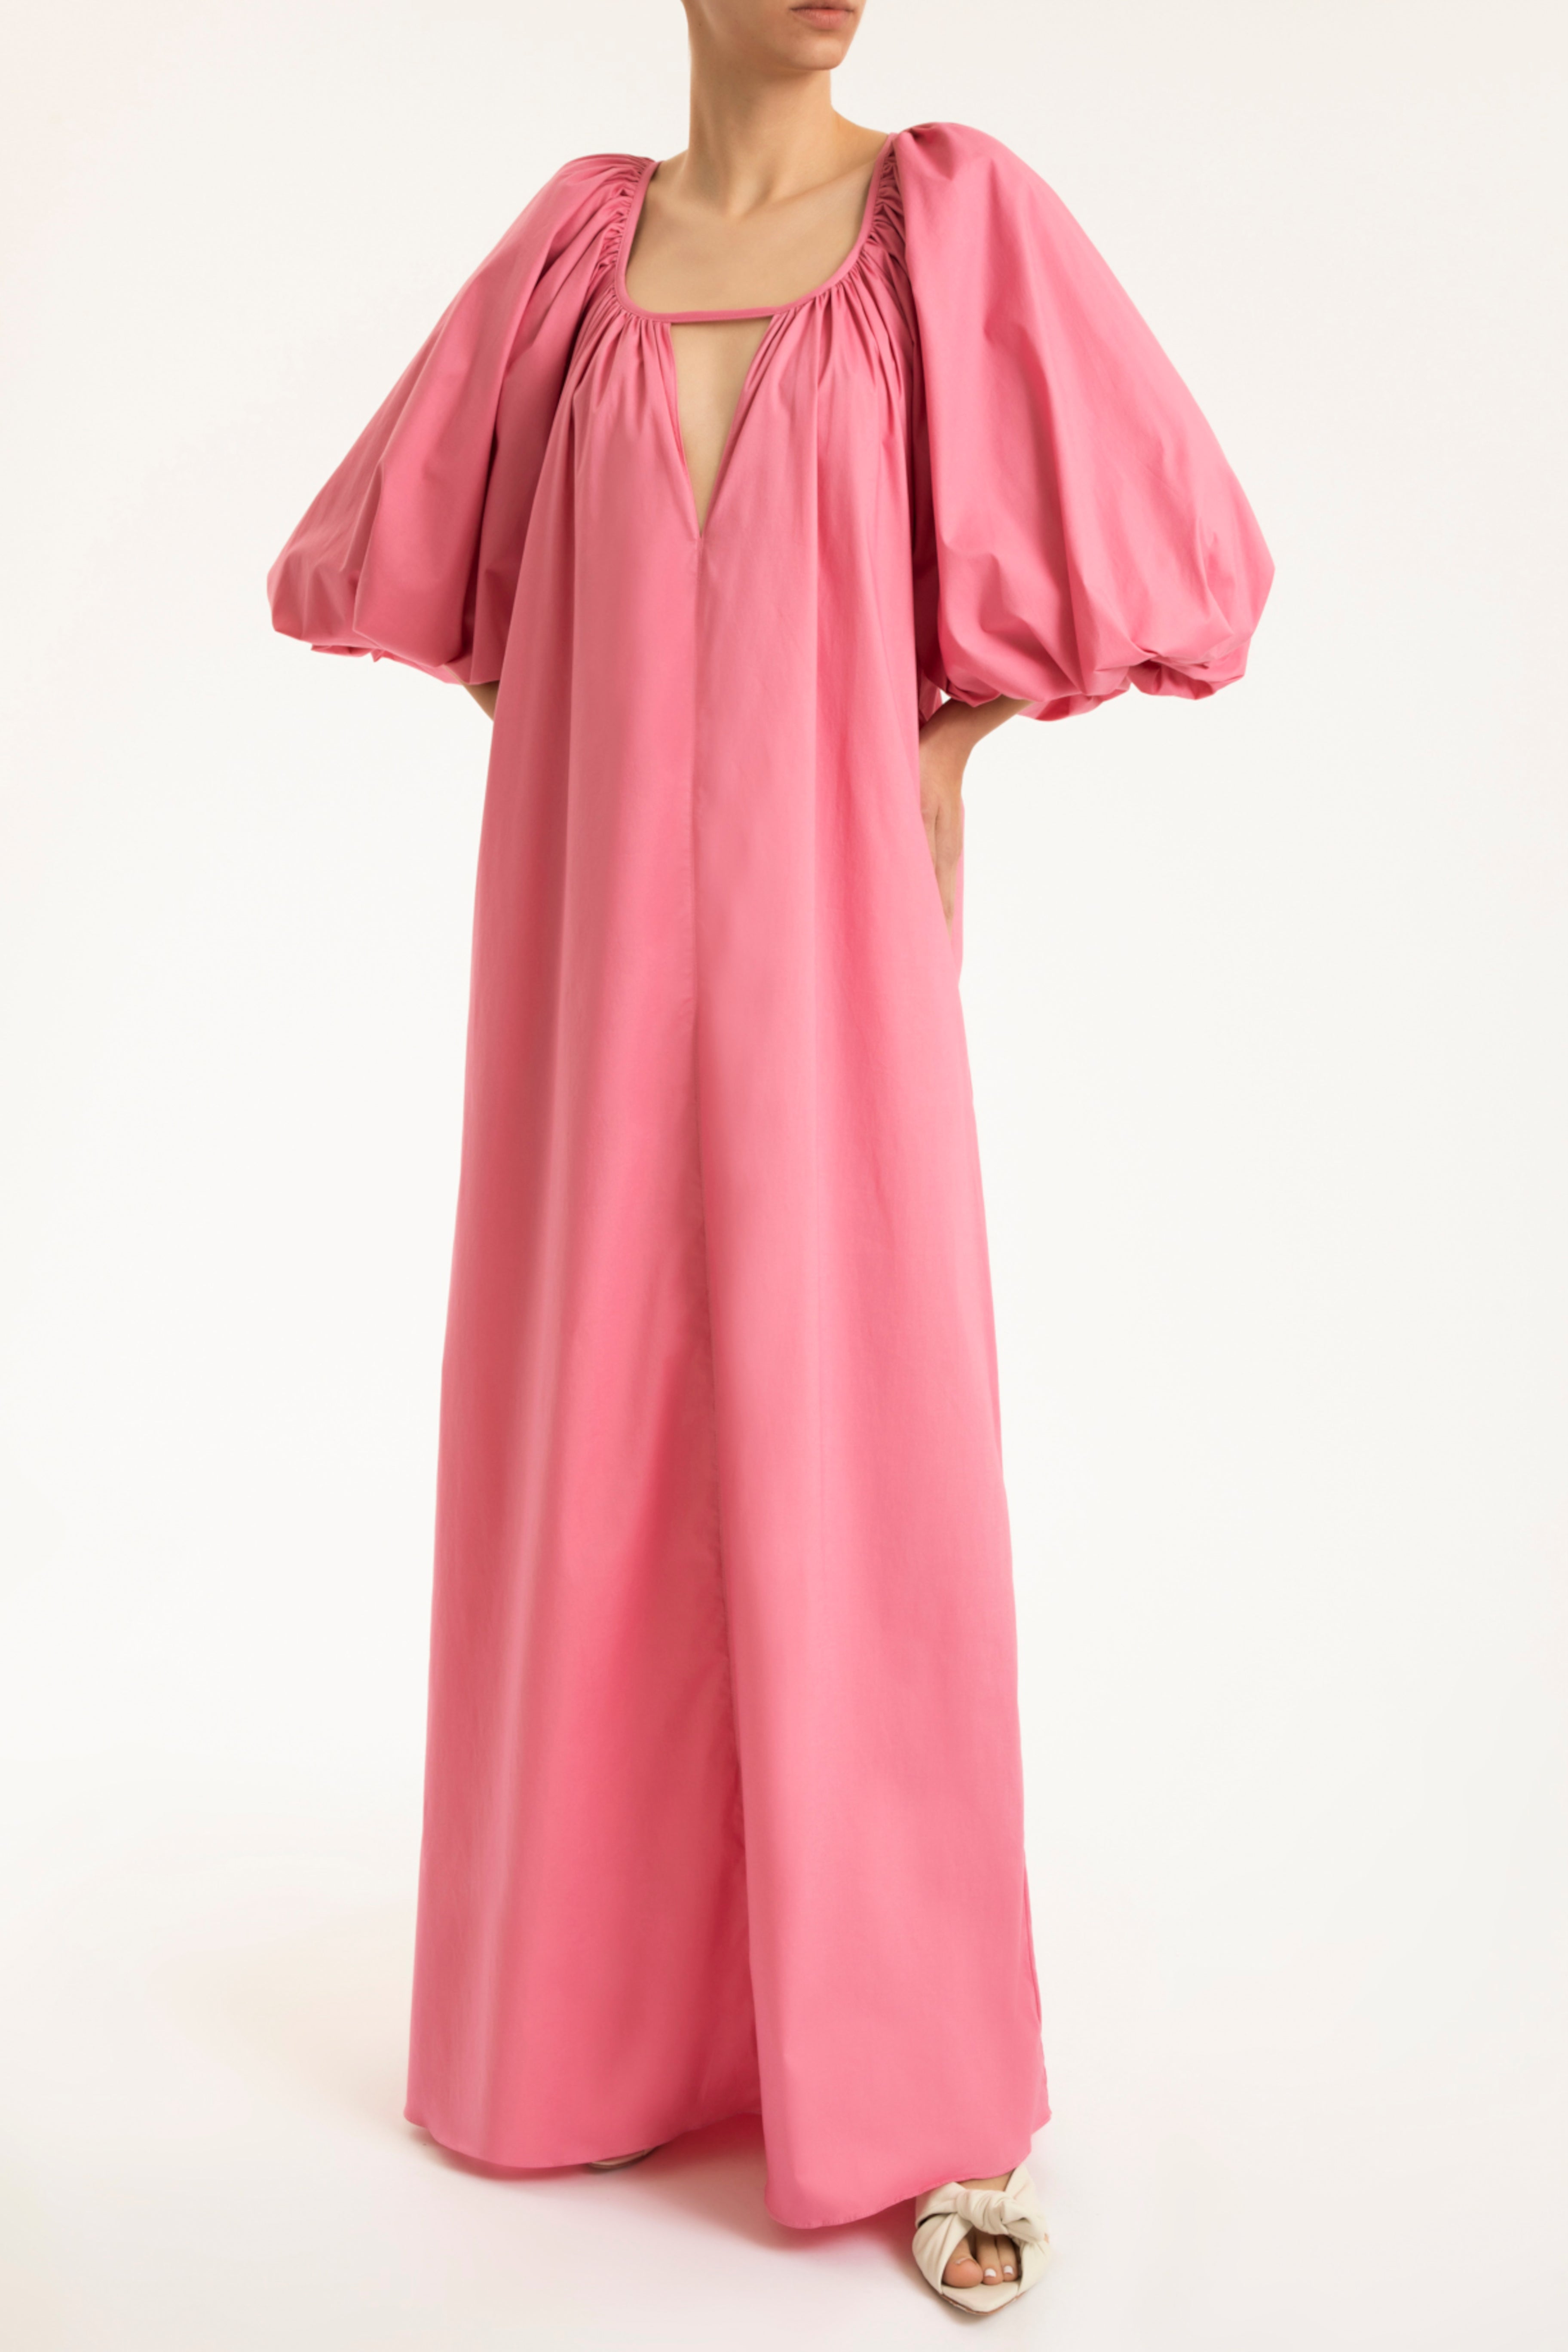 Effortless Chic Pink Puff-Sleeved Long Dress Front